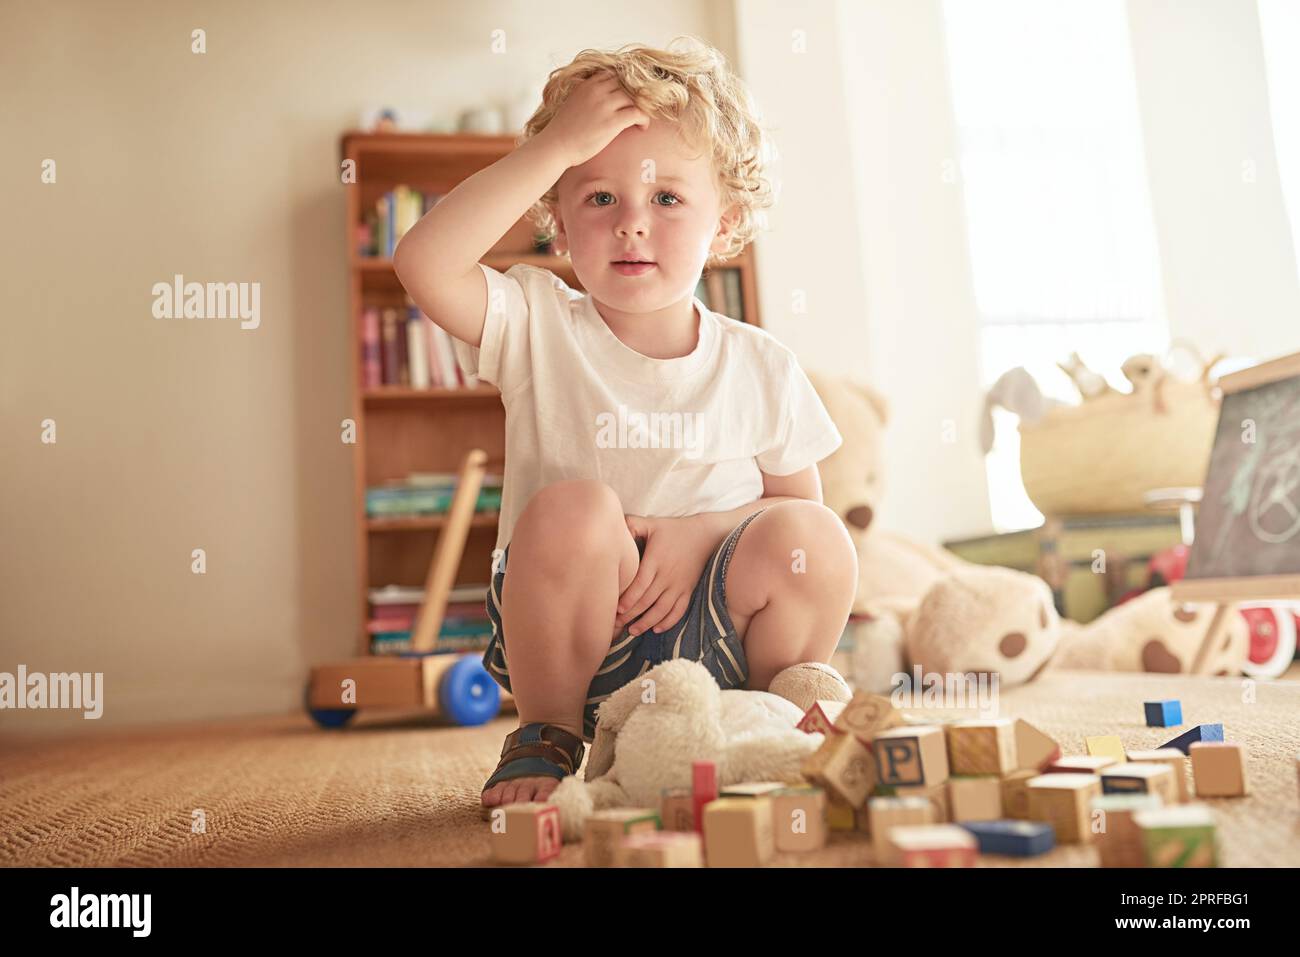 Oops They all came falling down. Portrait of an adorable little boy playing with wooden blocks at home. Stock Photo